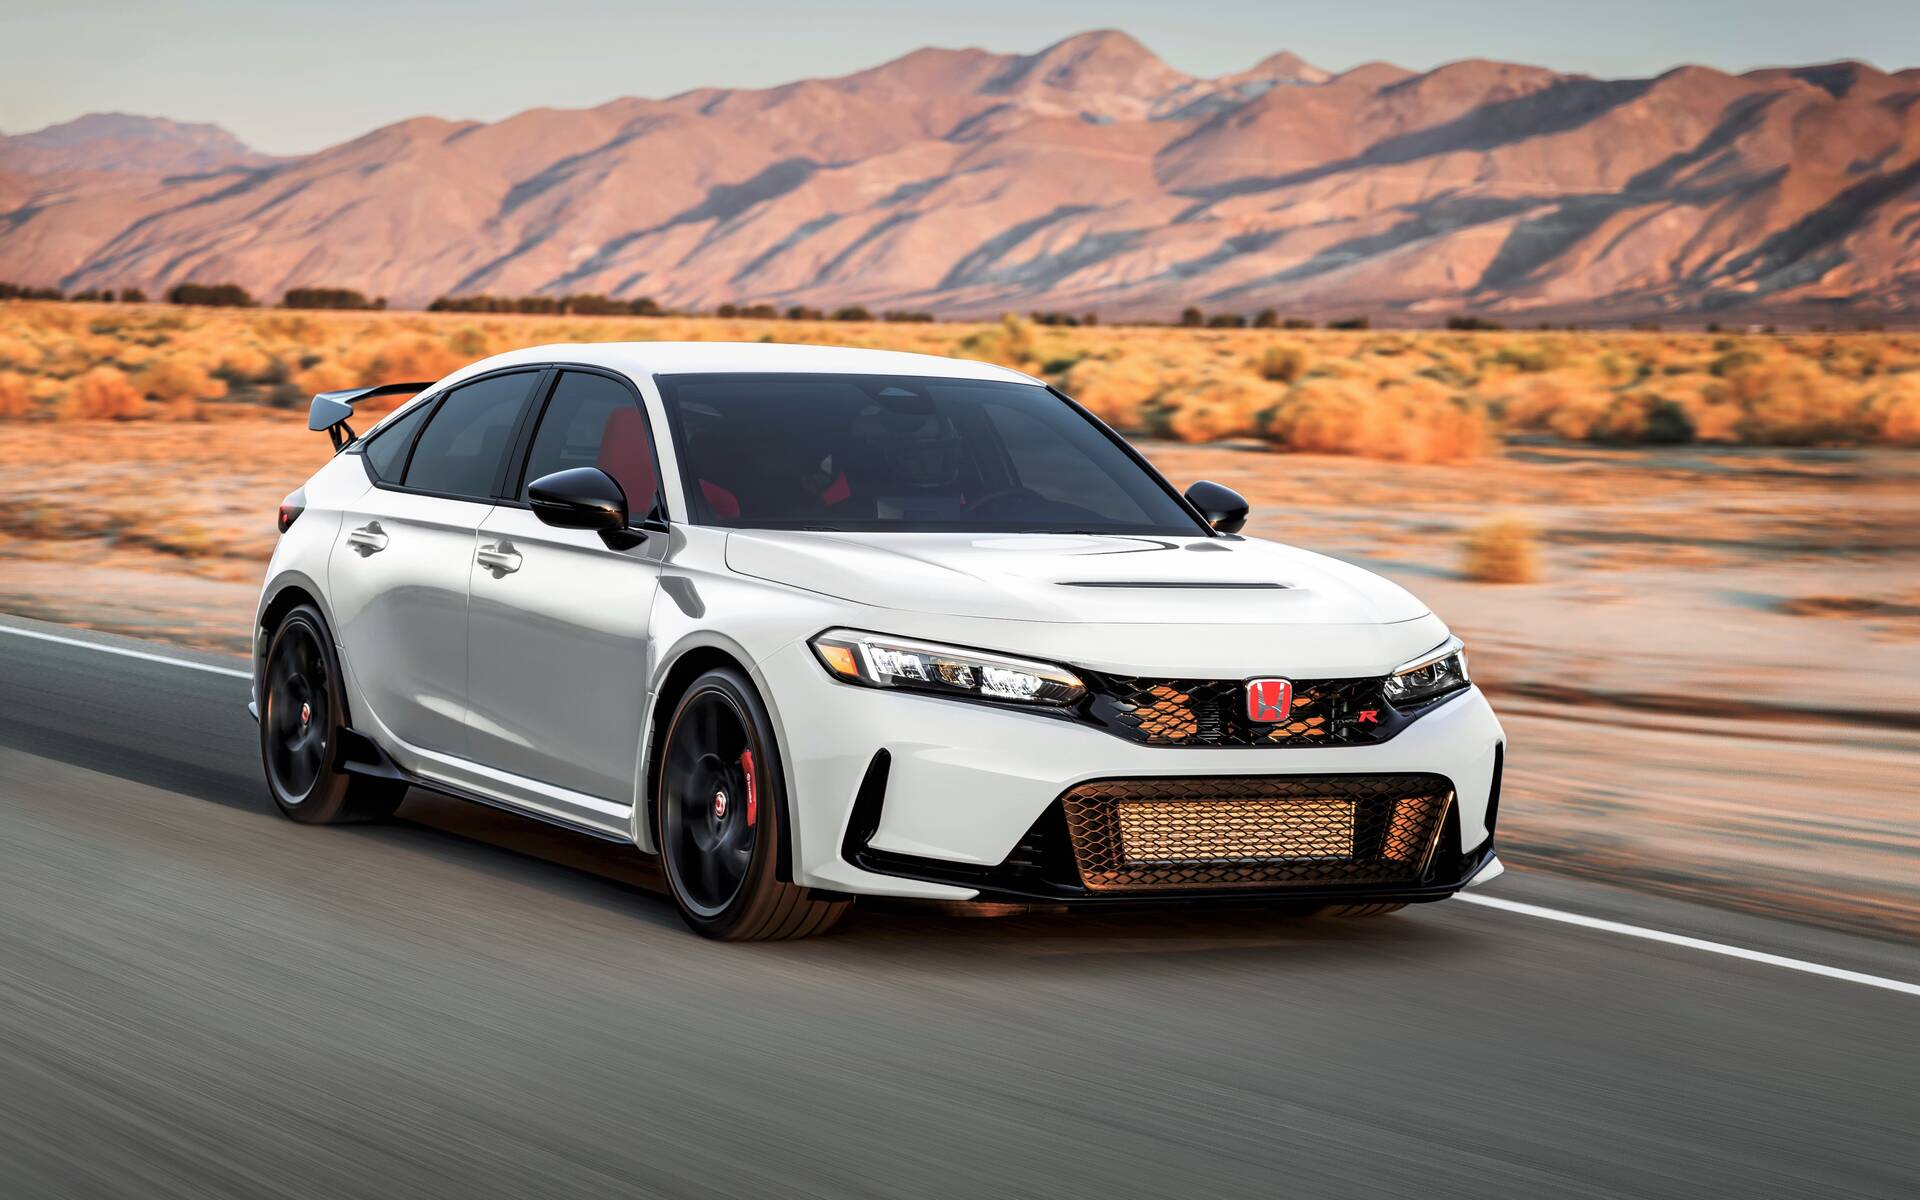 2023 honda civic type r to cost over $50,000, likely even more